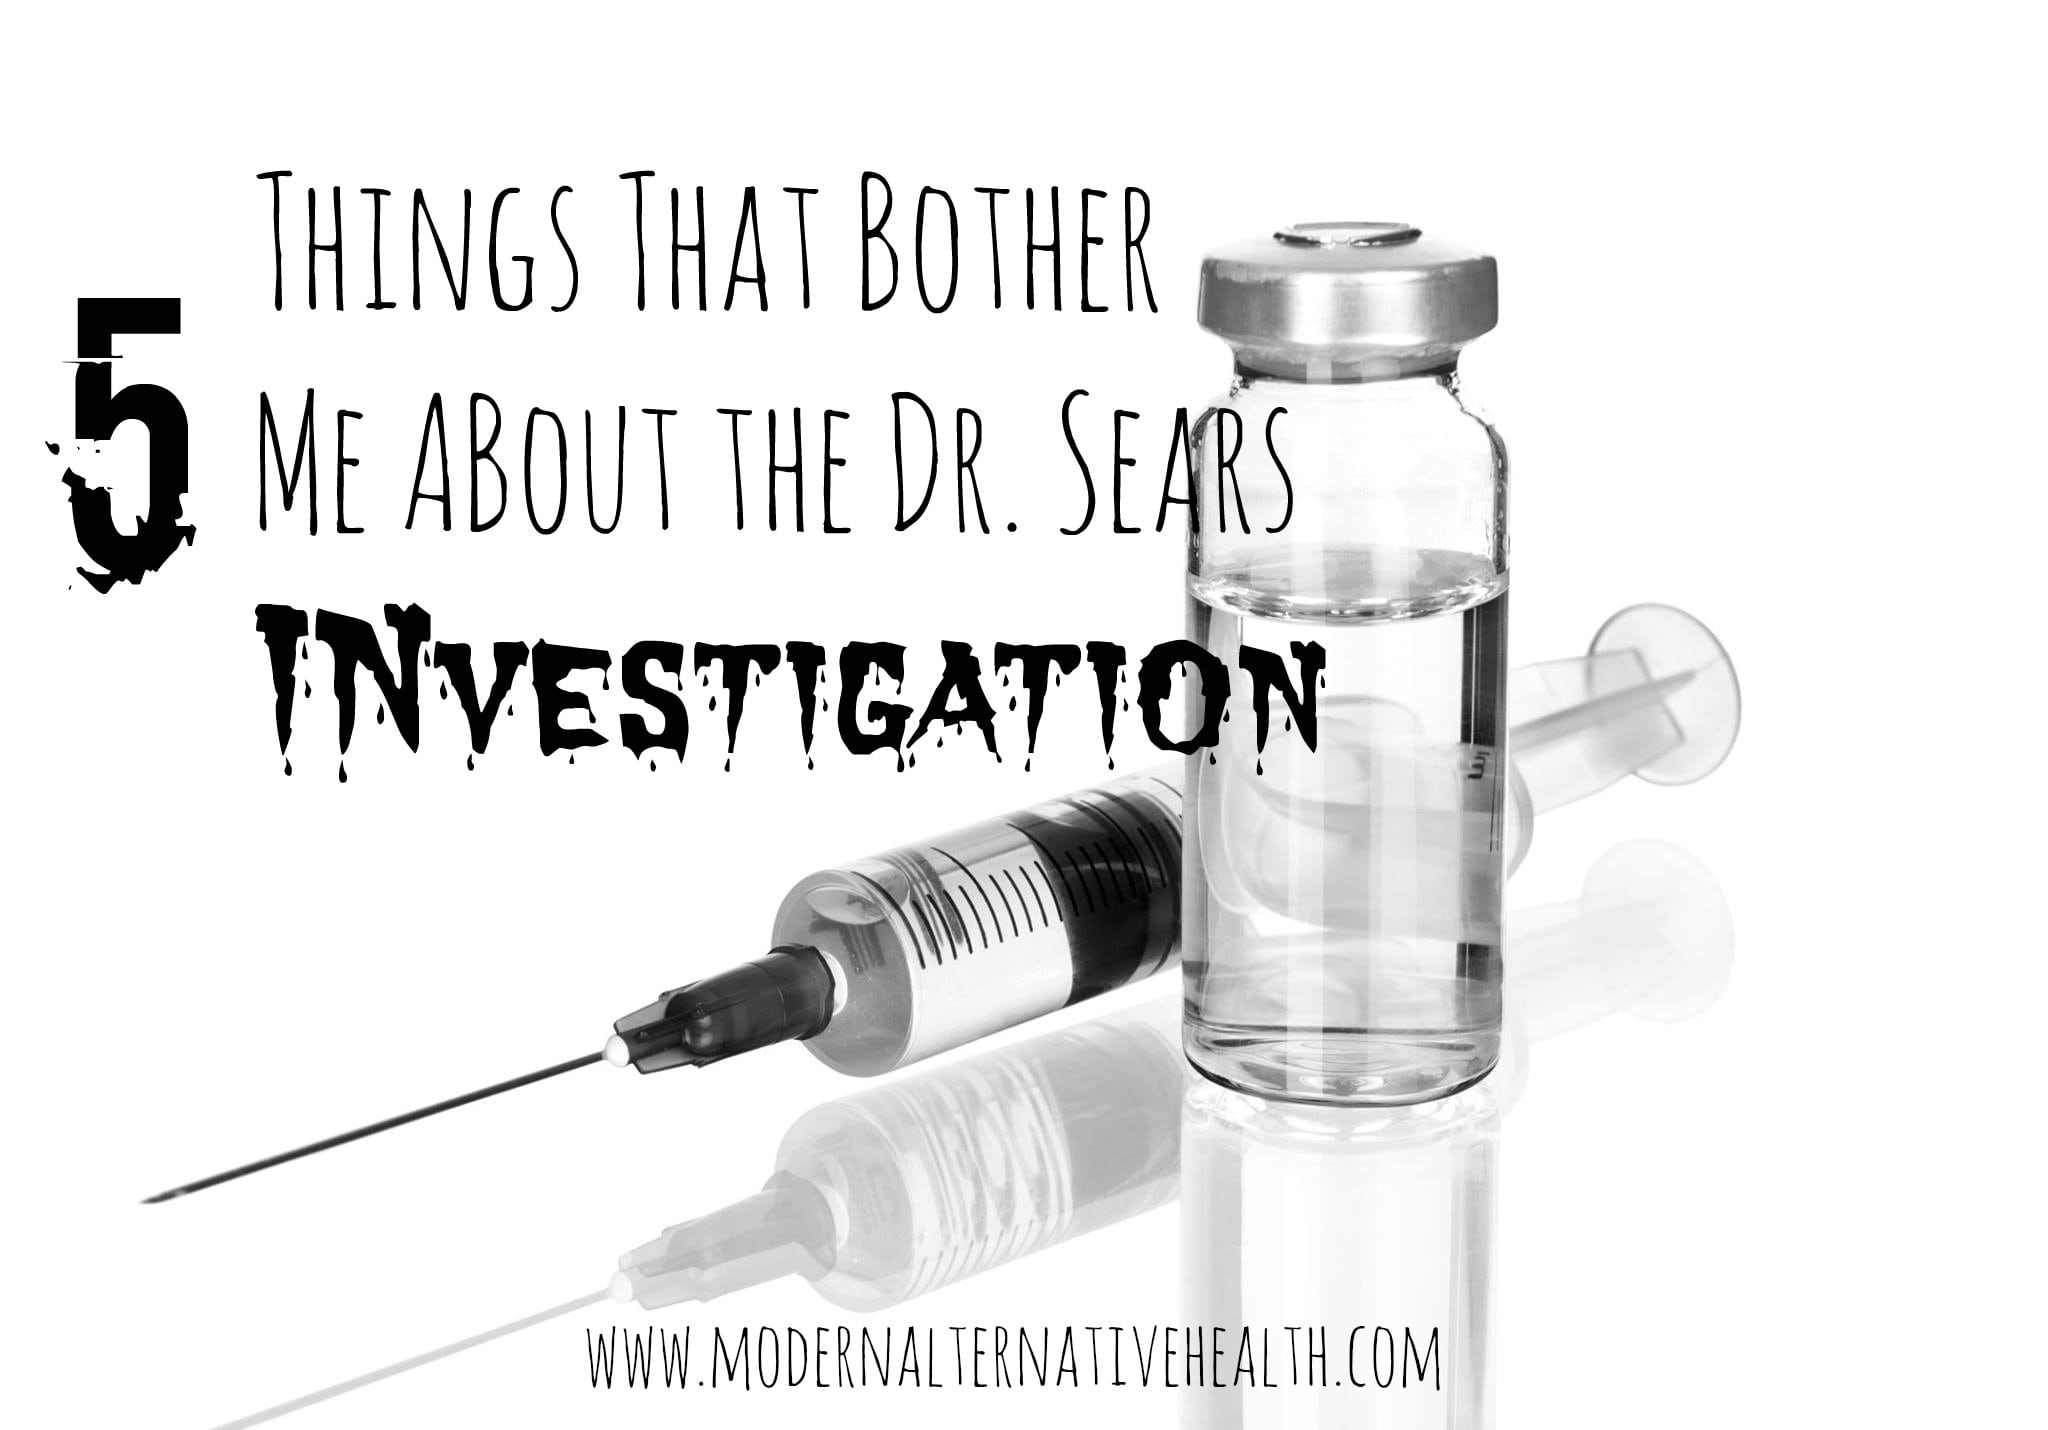 Five Things That Bother Me About the Dr. Sears Investigation